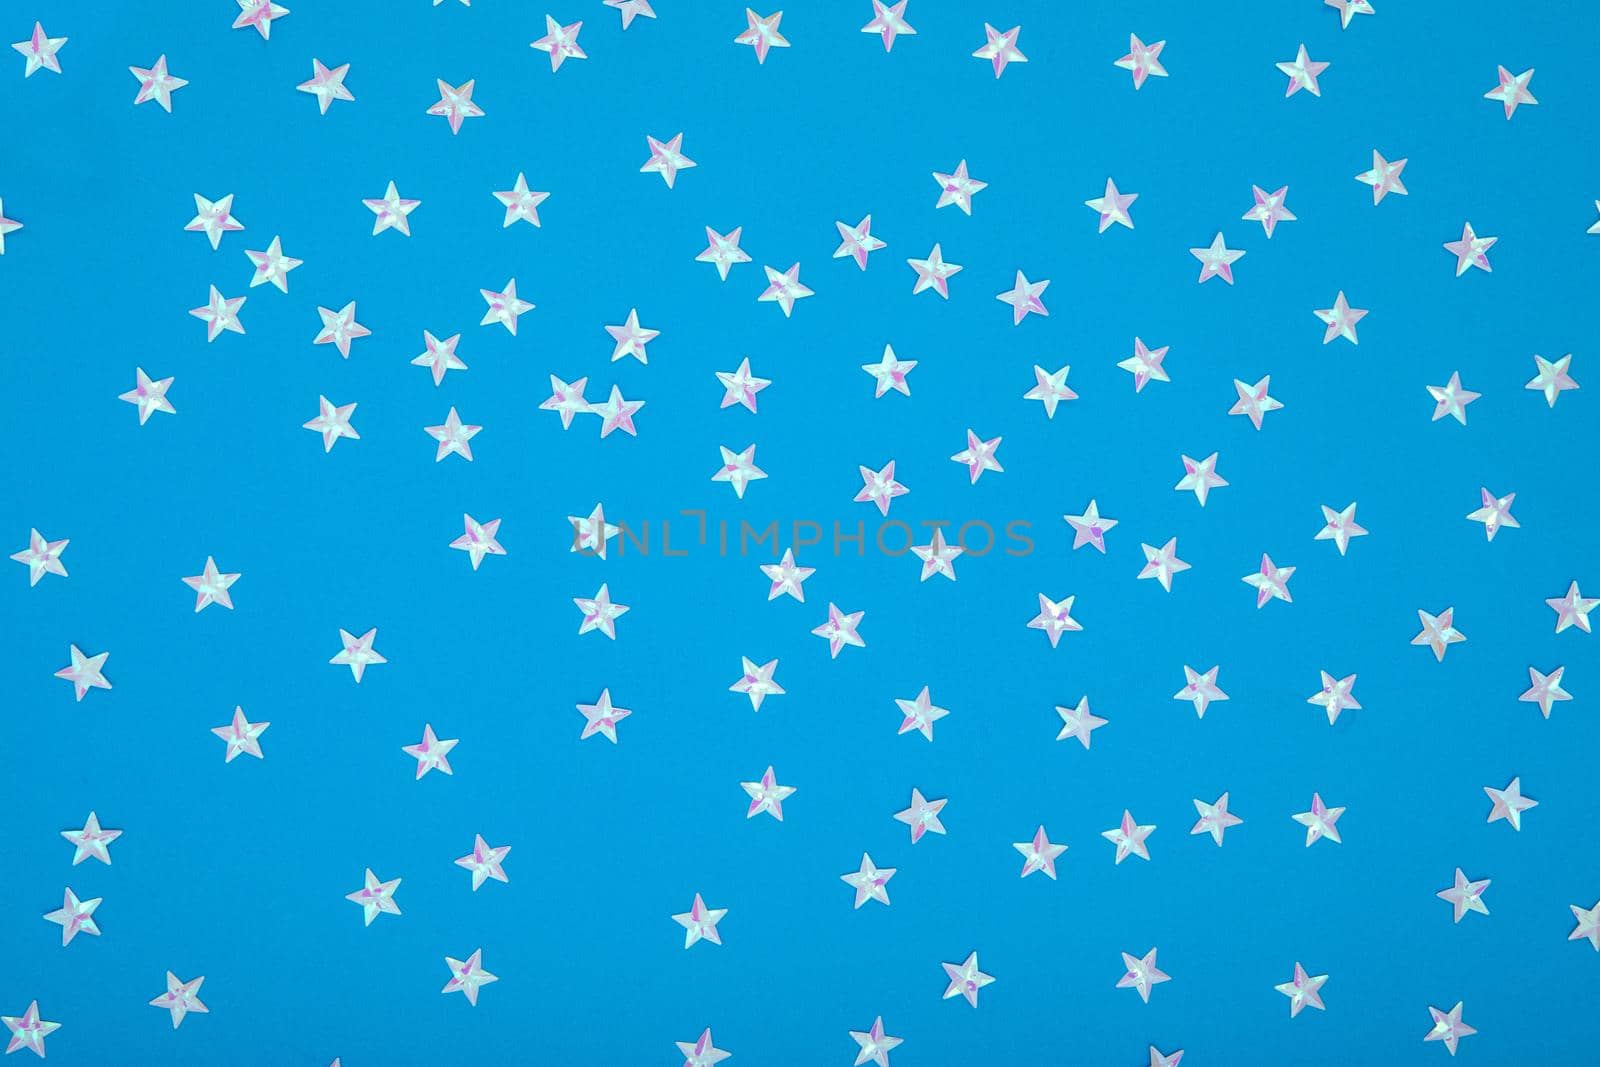 Blue background with shiny iridescent pearl stars. Festive trendy blue background with silver metallic stars